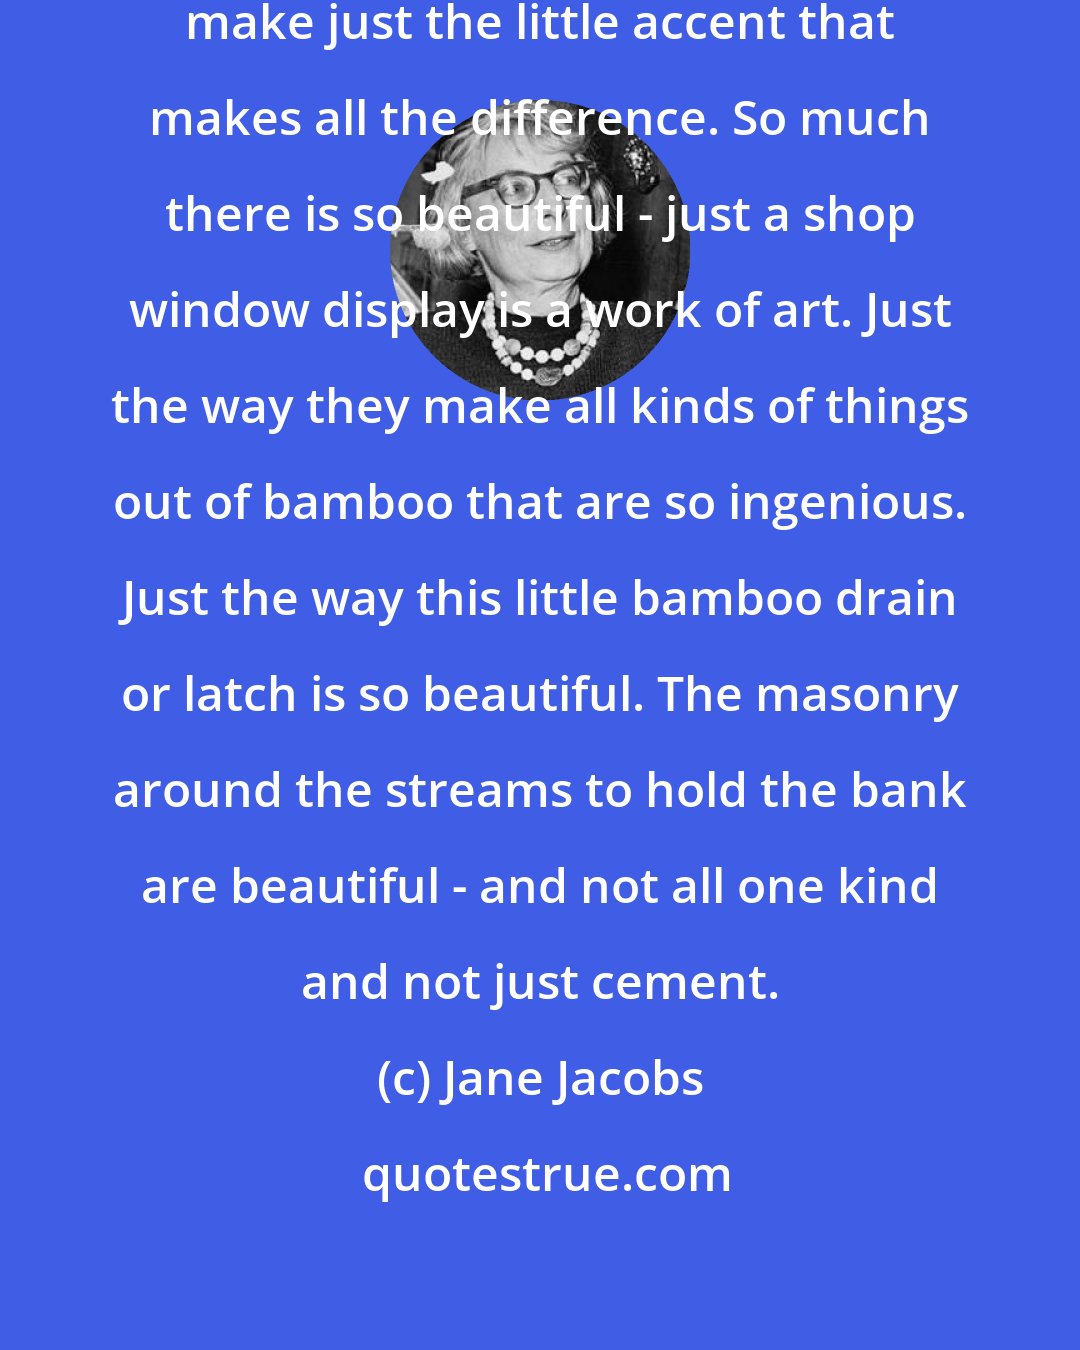 Jane Jacobs: The Japanese are virtuosos. They make just the little accent that makes all the difference. So much there is so beautiful - just a shop window display is a work of art. Just the way they make all kinds of things out of bamboo that are so ingenious. Just the way this little bamboo drain or latch is so beautiful. The masonry around the streams to hold the bank are beautiful - and not all one kind and not just cement.